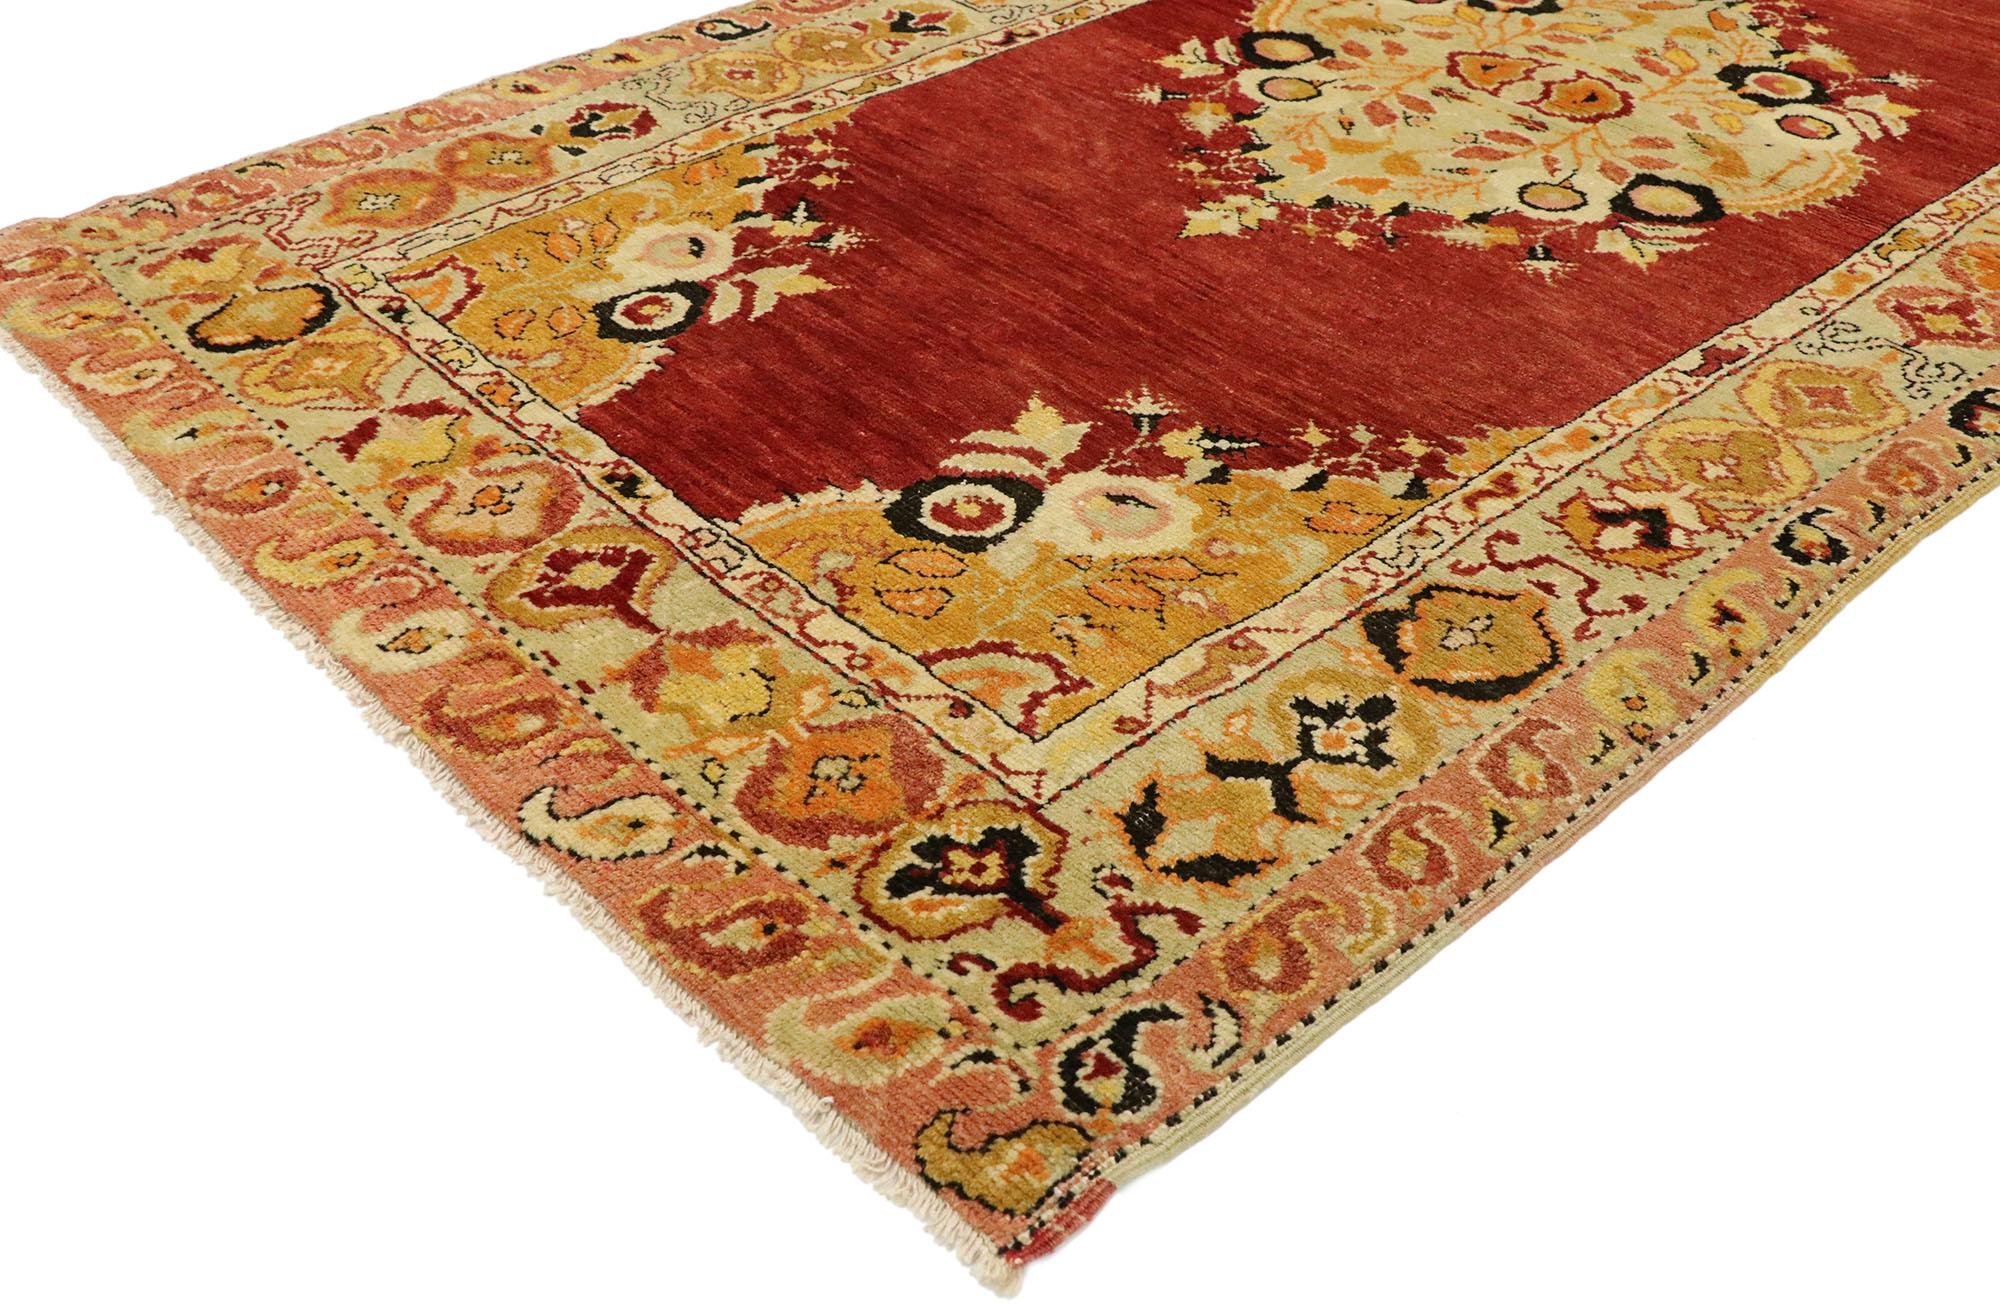 51267 Vintage Turkish Oushak Rug, 03'02 x 05'11. Steeped in Anatolian history and cultural significance, this hand-knotted wool vintage Turkish Oushak rug masterfully blends sophistication with a vibrant palette. Its design draws the eye to the